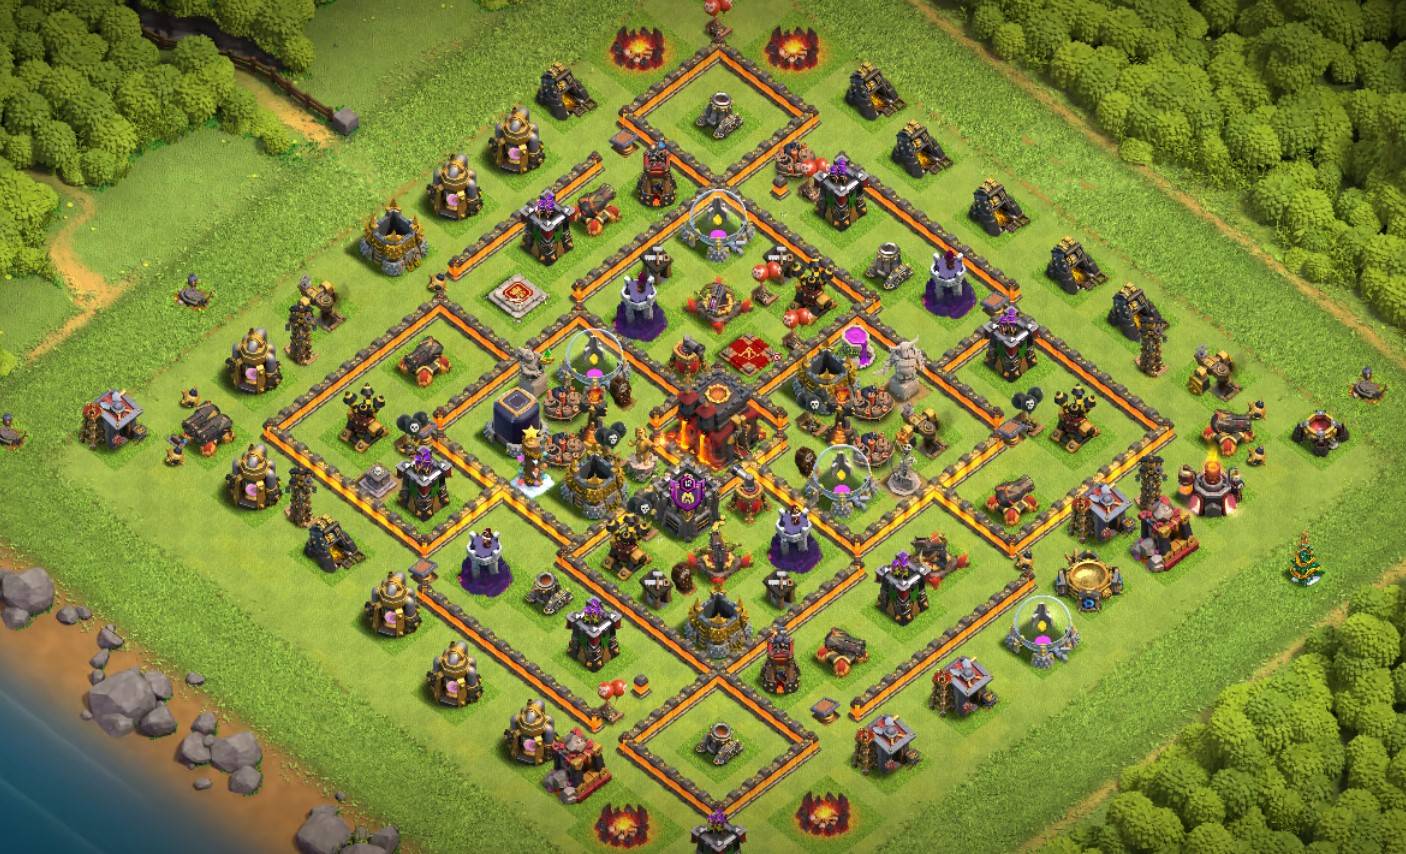 th10 farming base with copy link